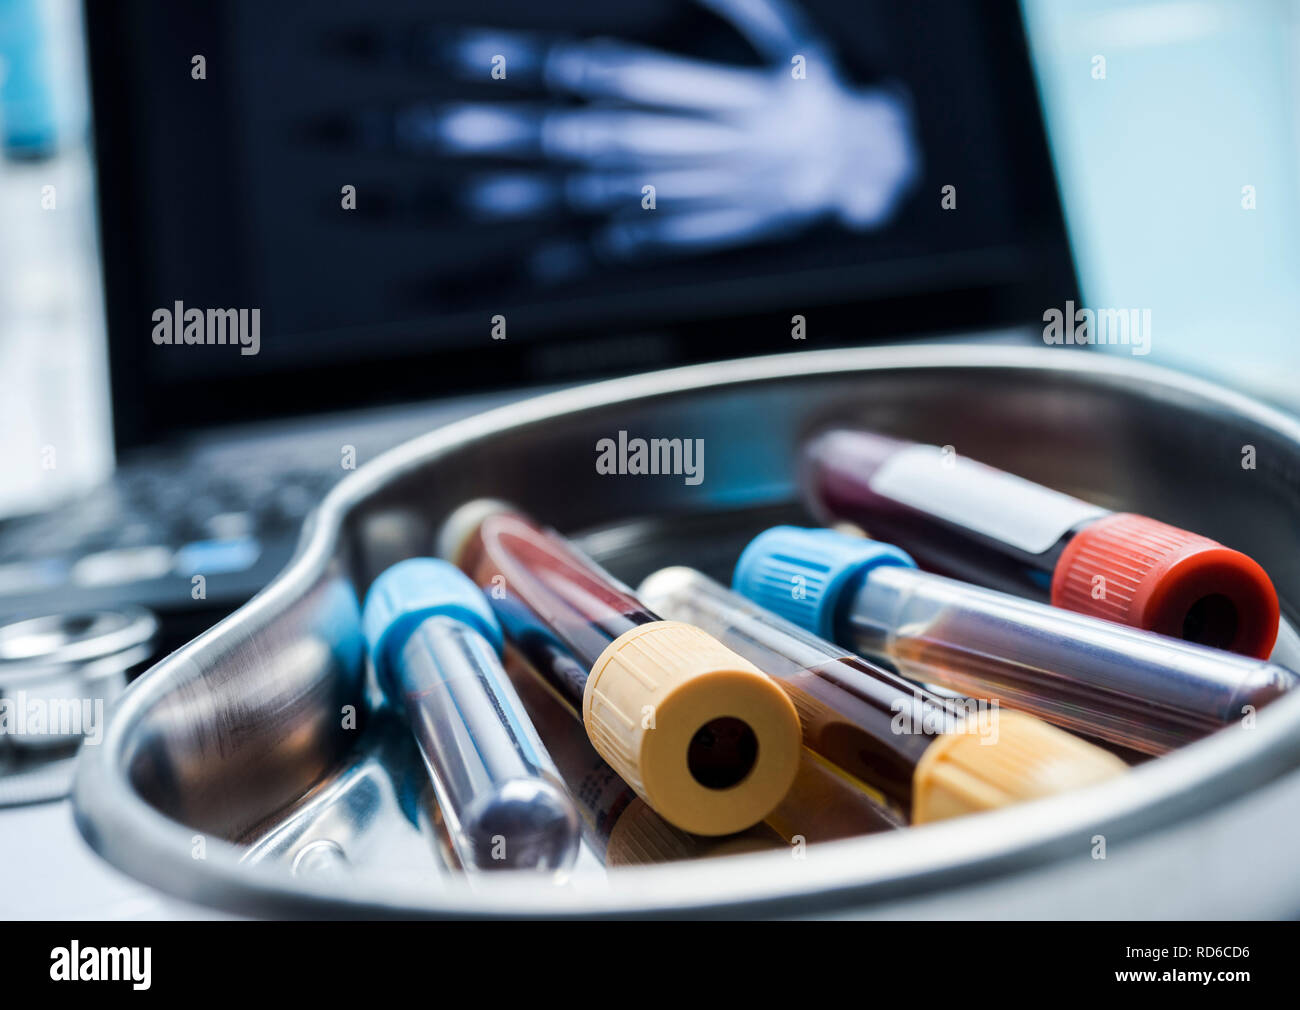 Several vials and blood sample in a metal tray, conceptual image Stock Photo